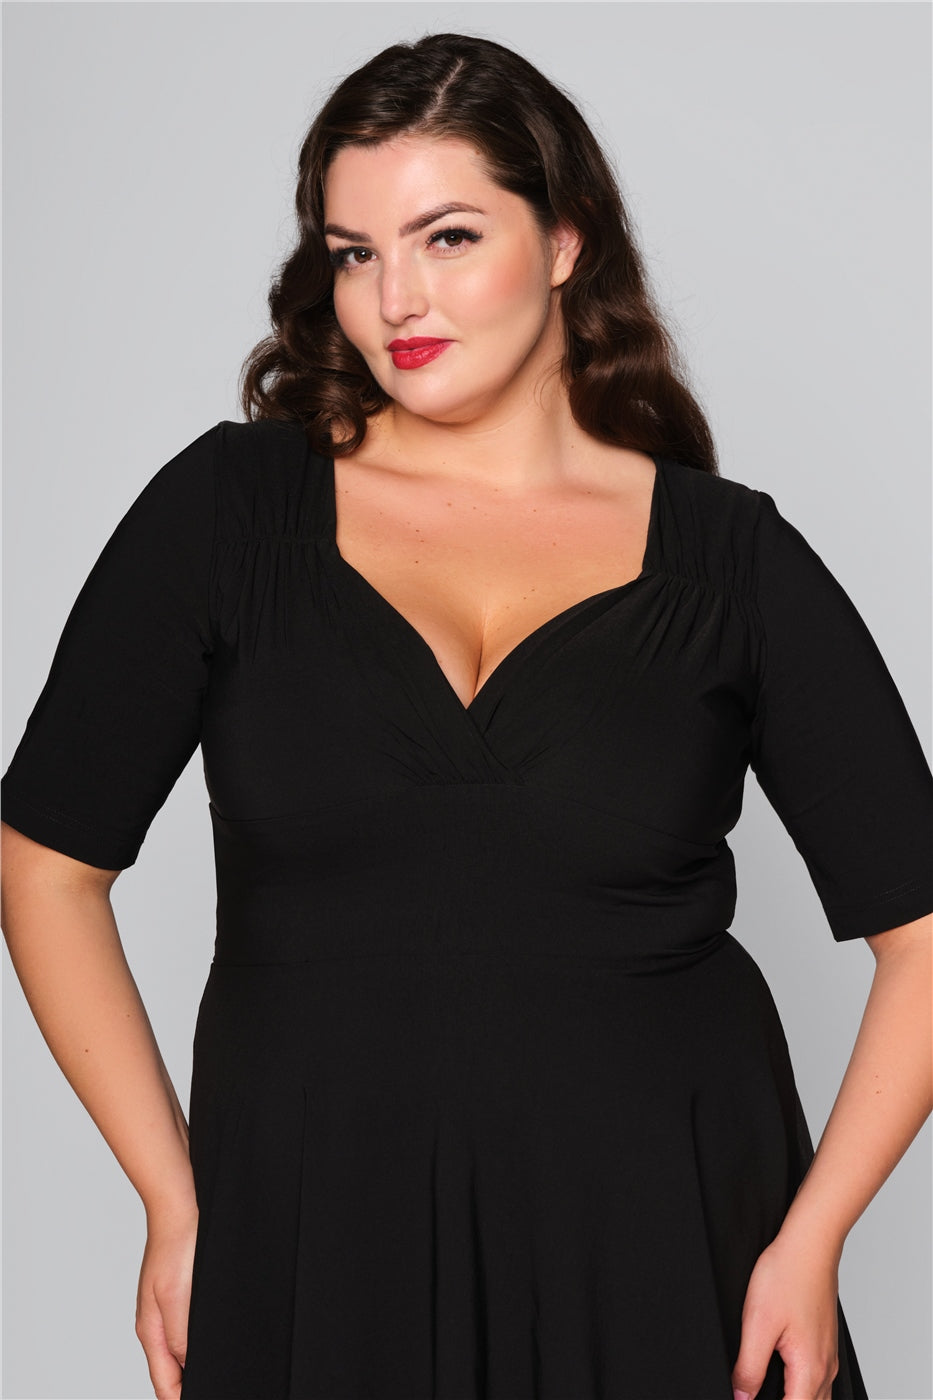 Pretty brunette vintage style model wearing a black dress with a flattering sweetheart neckline and three quarter length sleeves